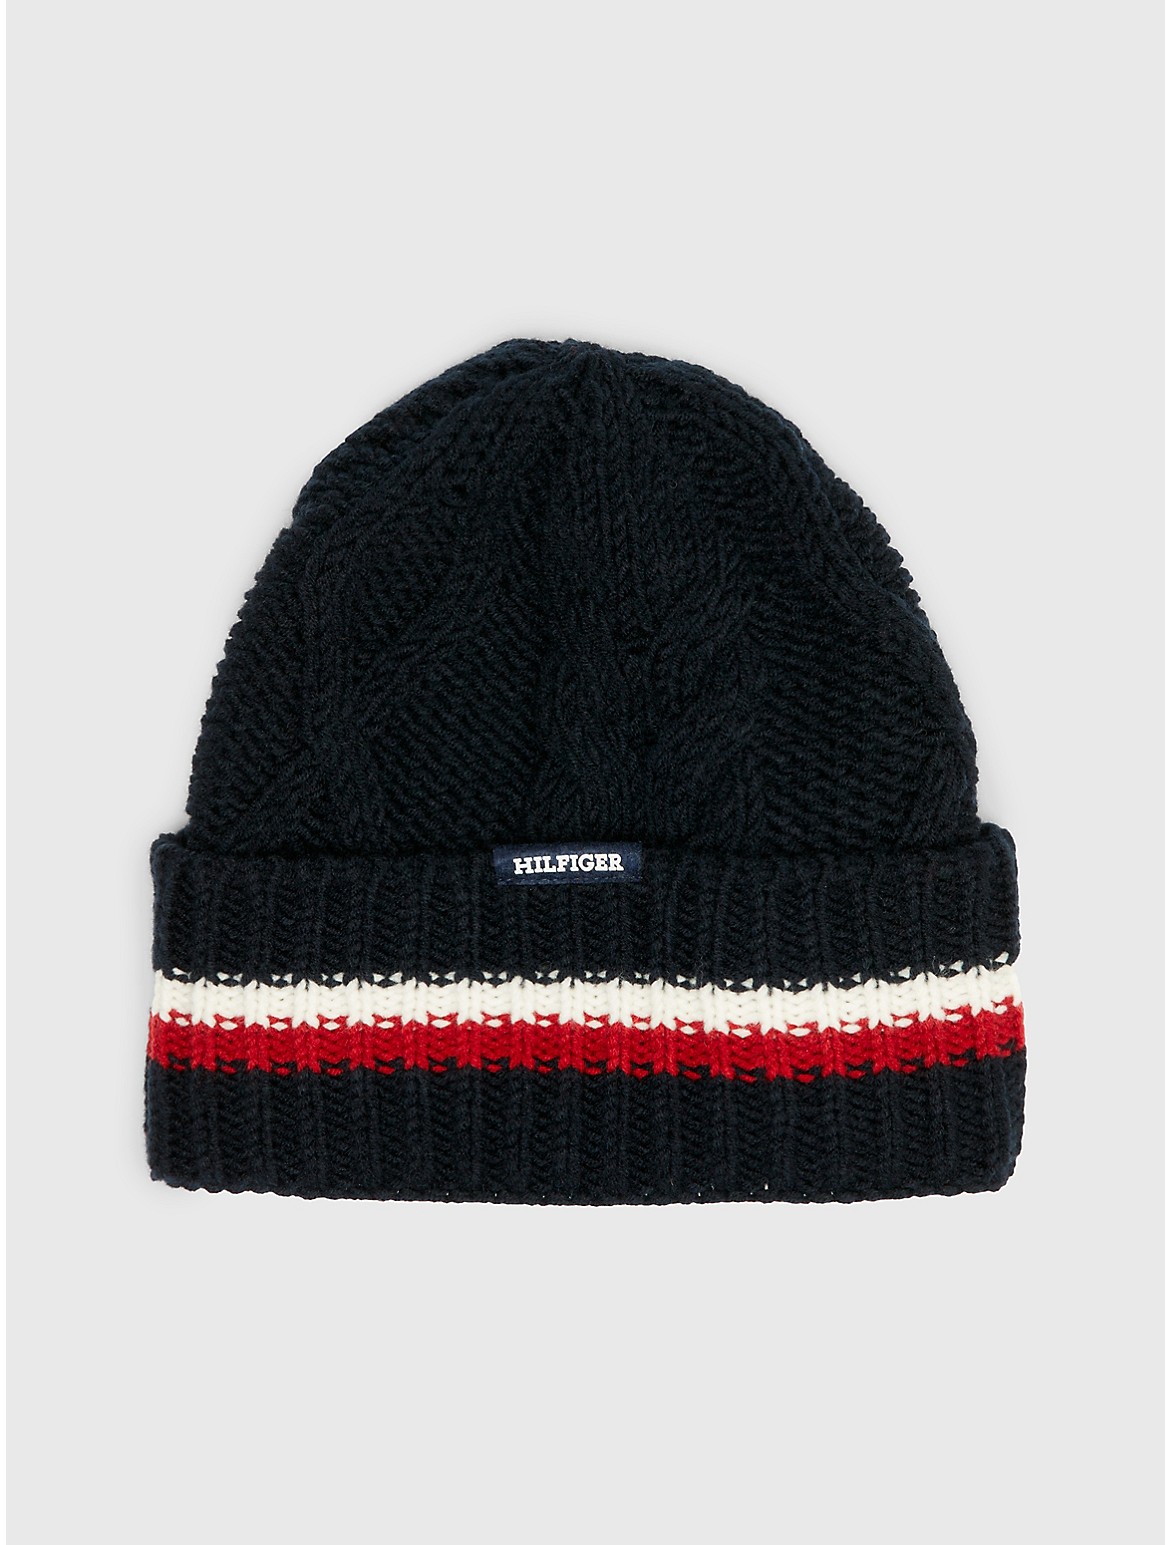 TOMMY HILFIGER CABLE KNIT CHUNKY BEANIE